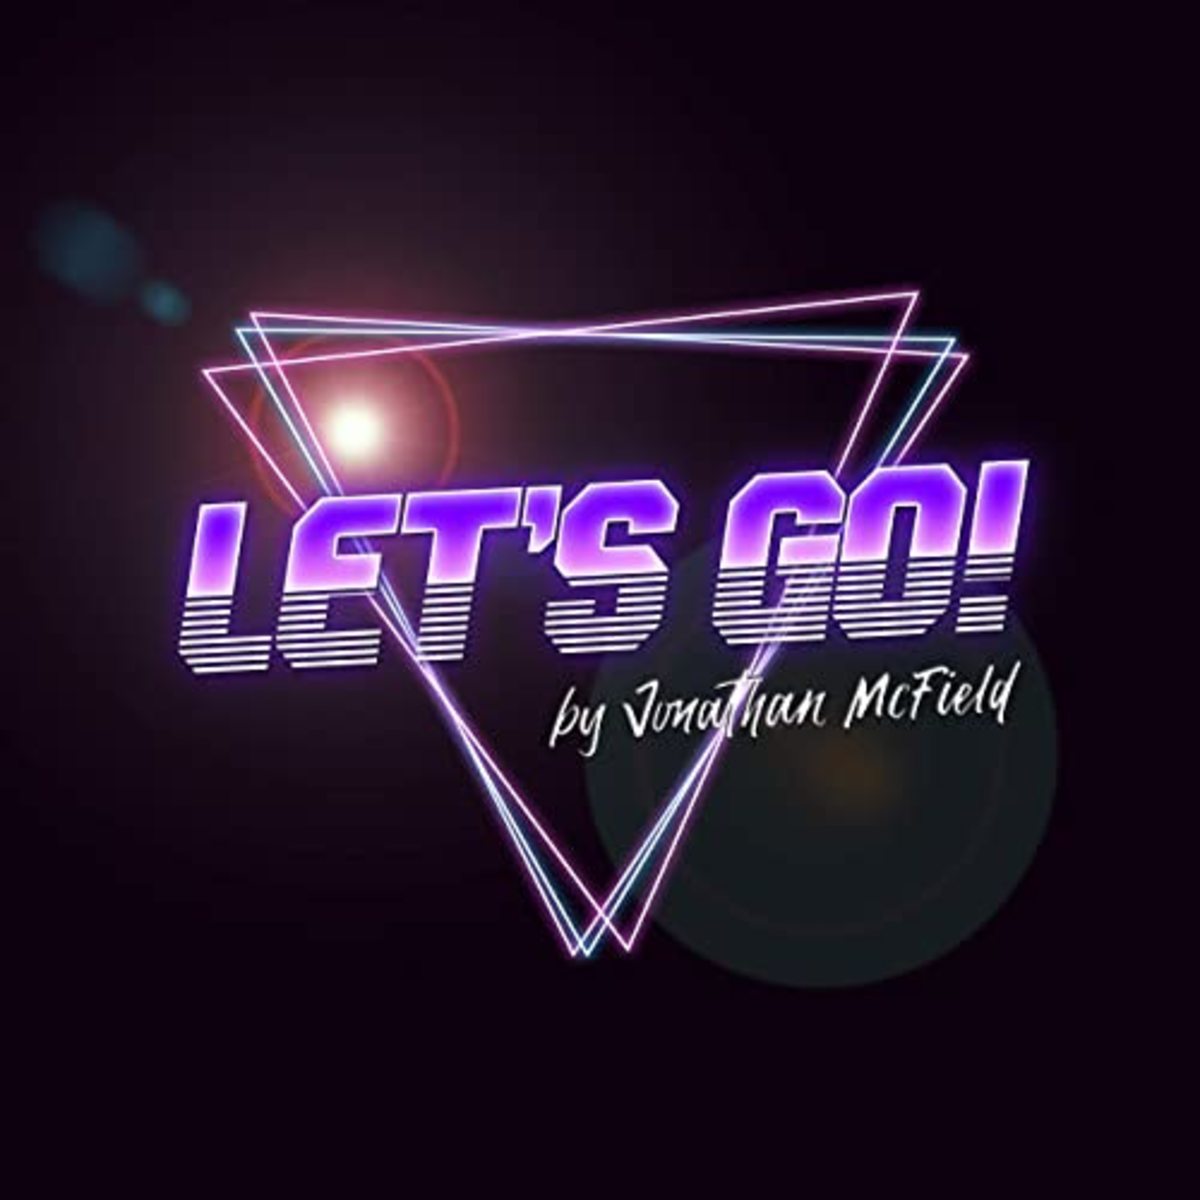 synth-single-review-lets-go-by-jonathan-mcfield